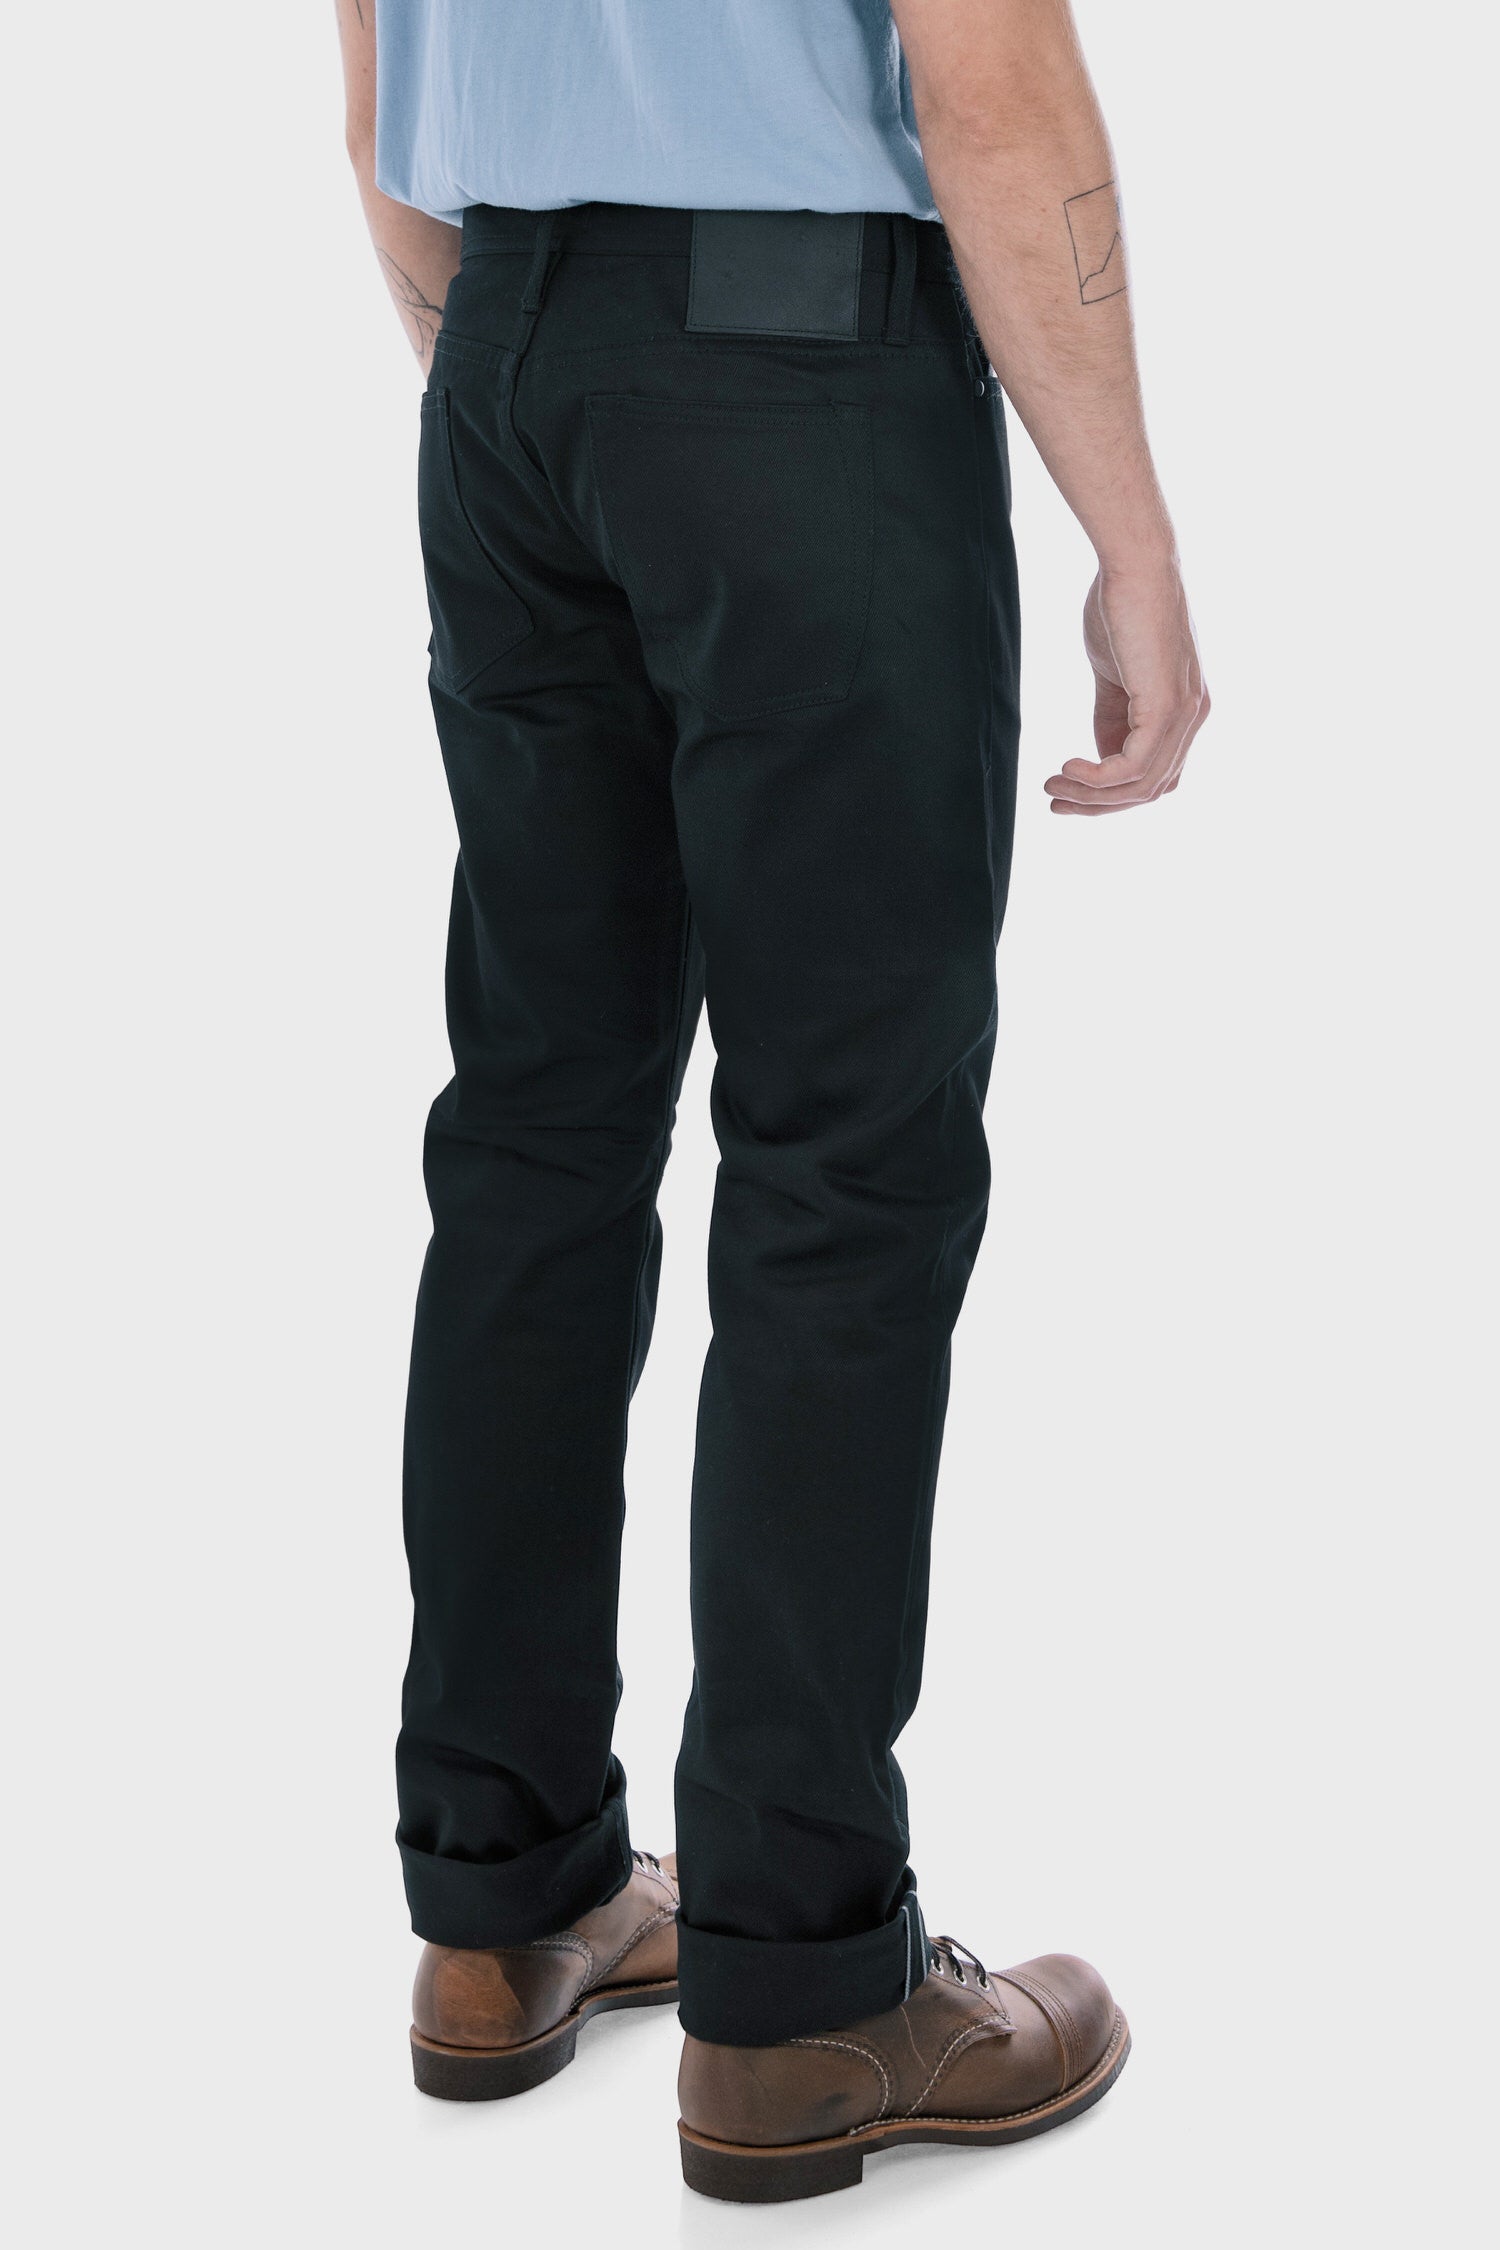 Unbranded Tapered Fit Chino in Black - Philistine